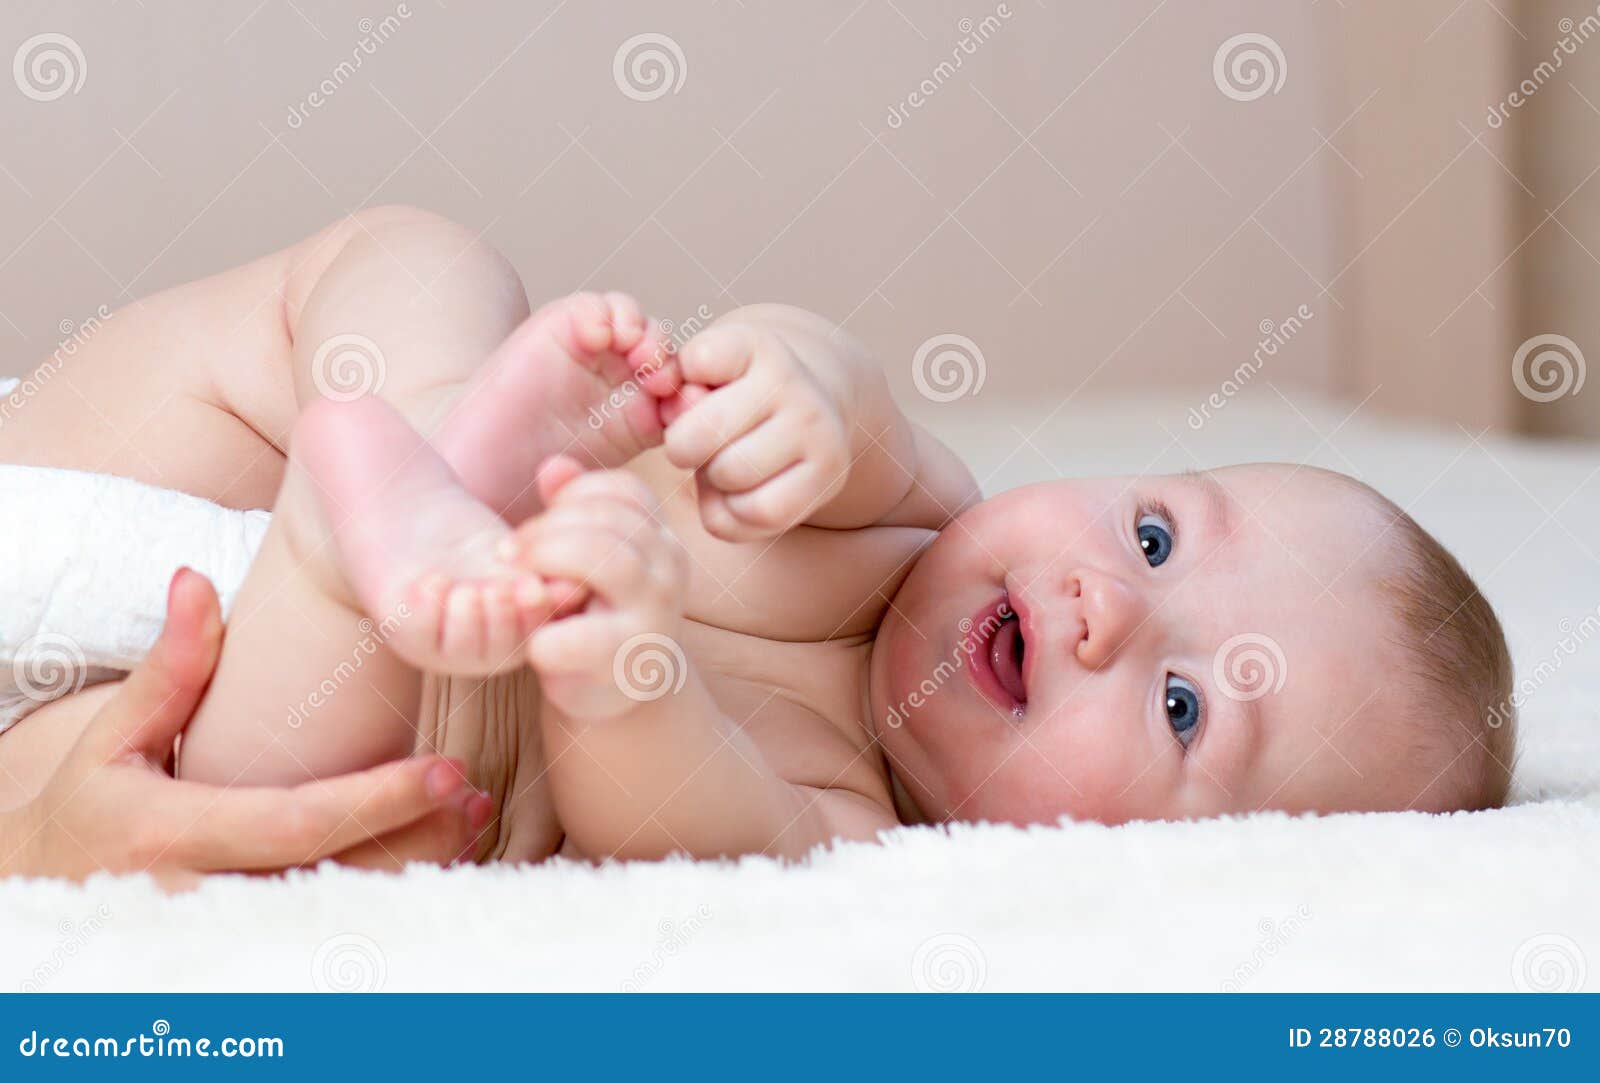 Cute Smiling Baby Boy Indoors Stock Photo - Image of healthy ...